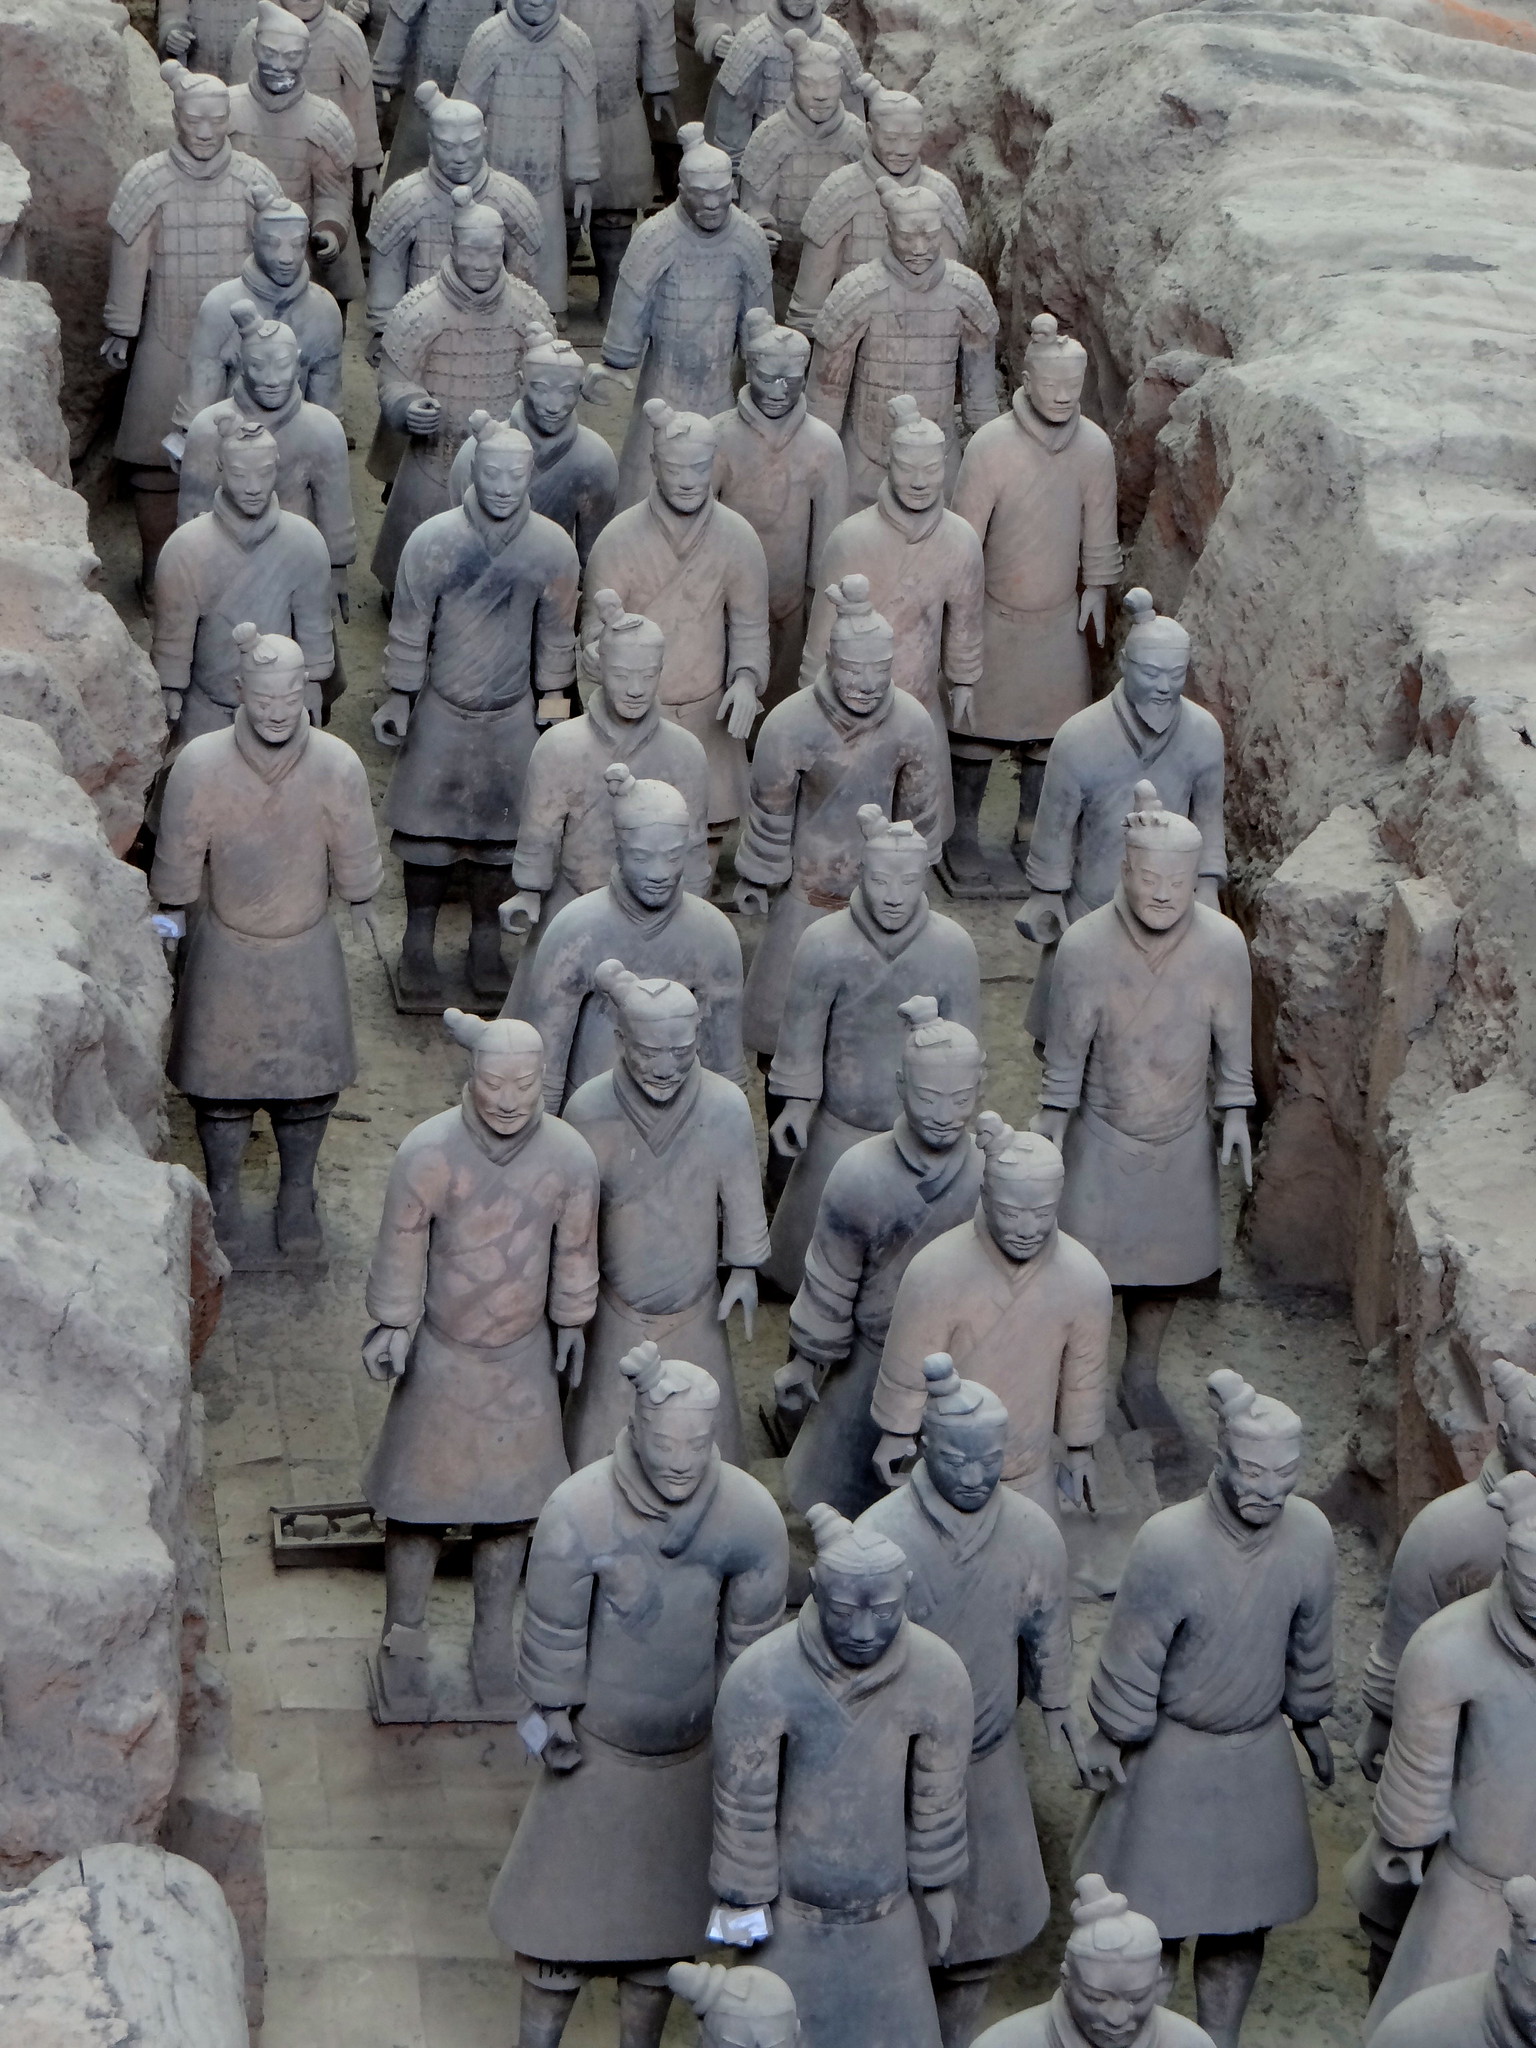 CYSO Visits the Real Terracotta Warrior Pits